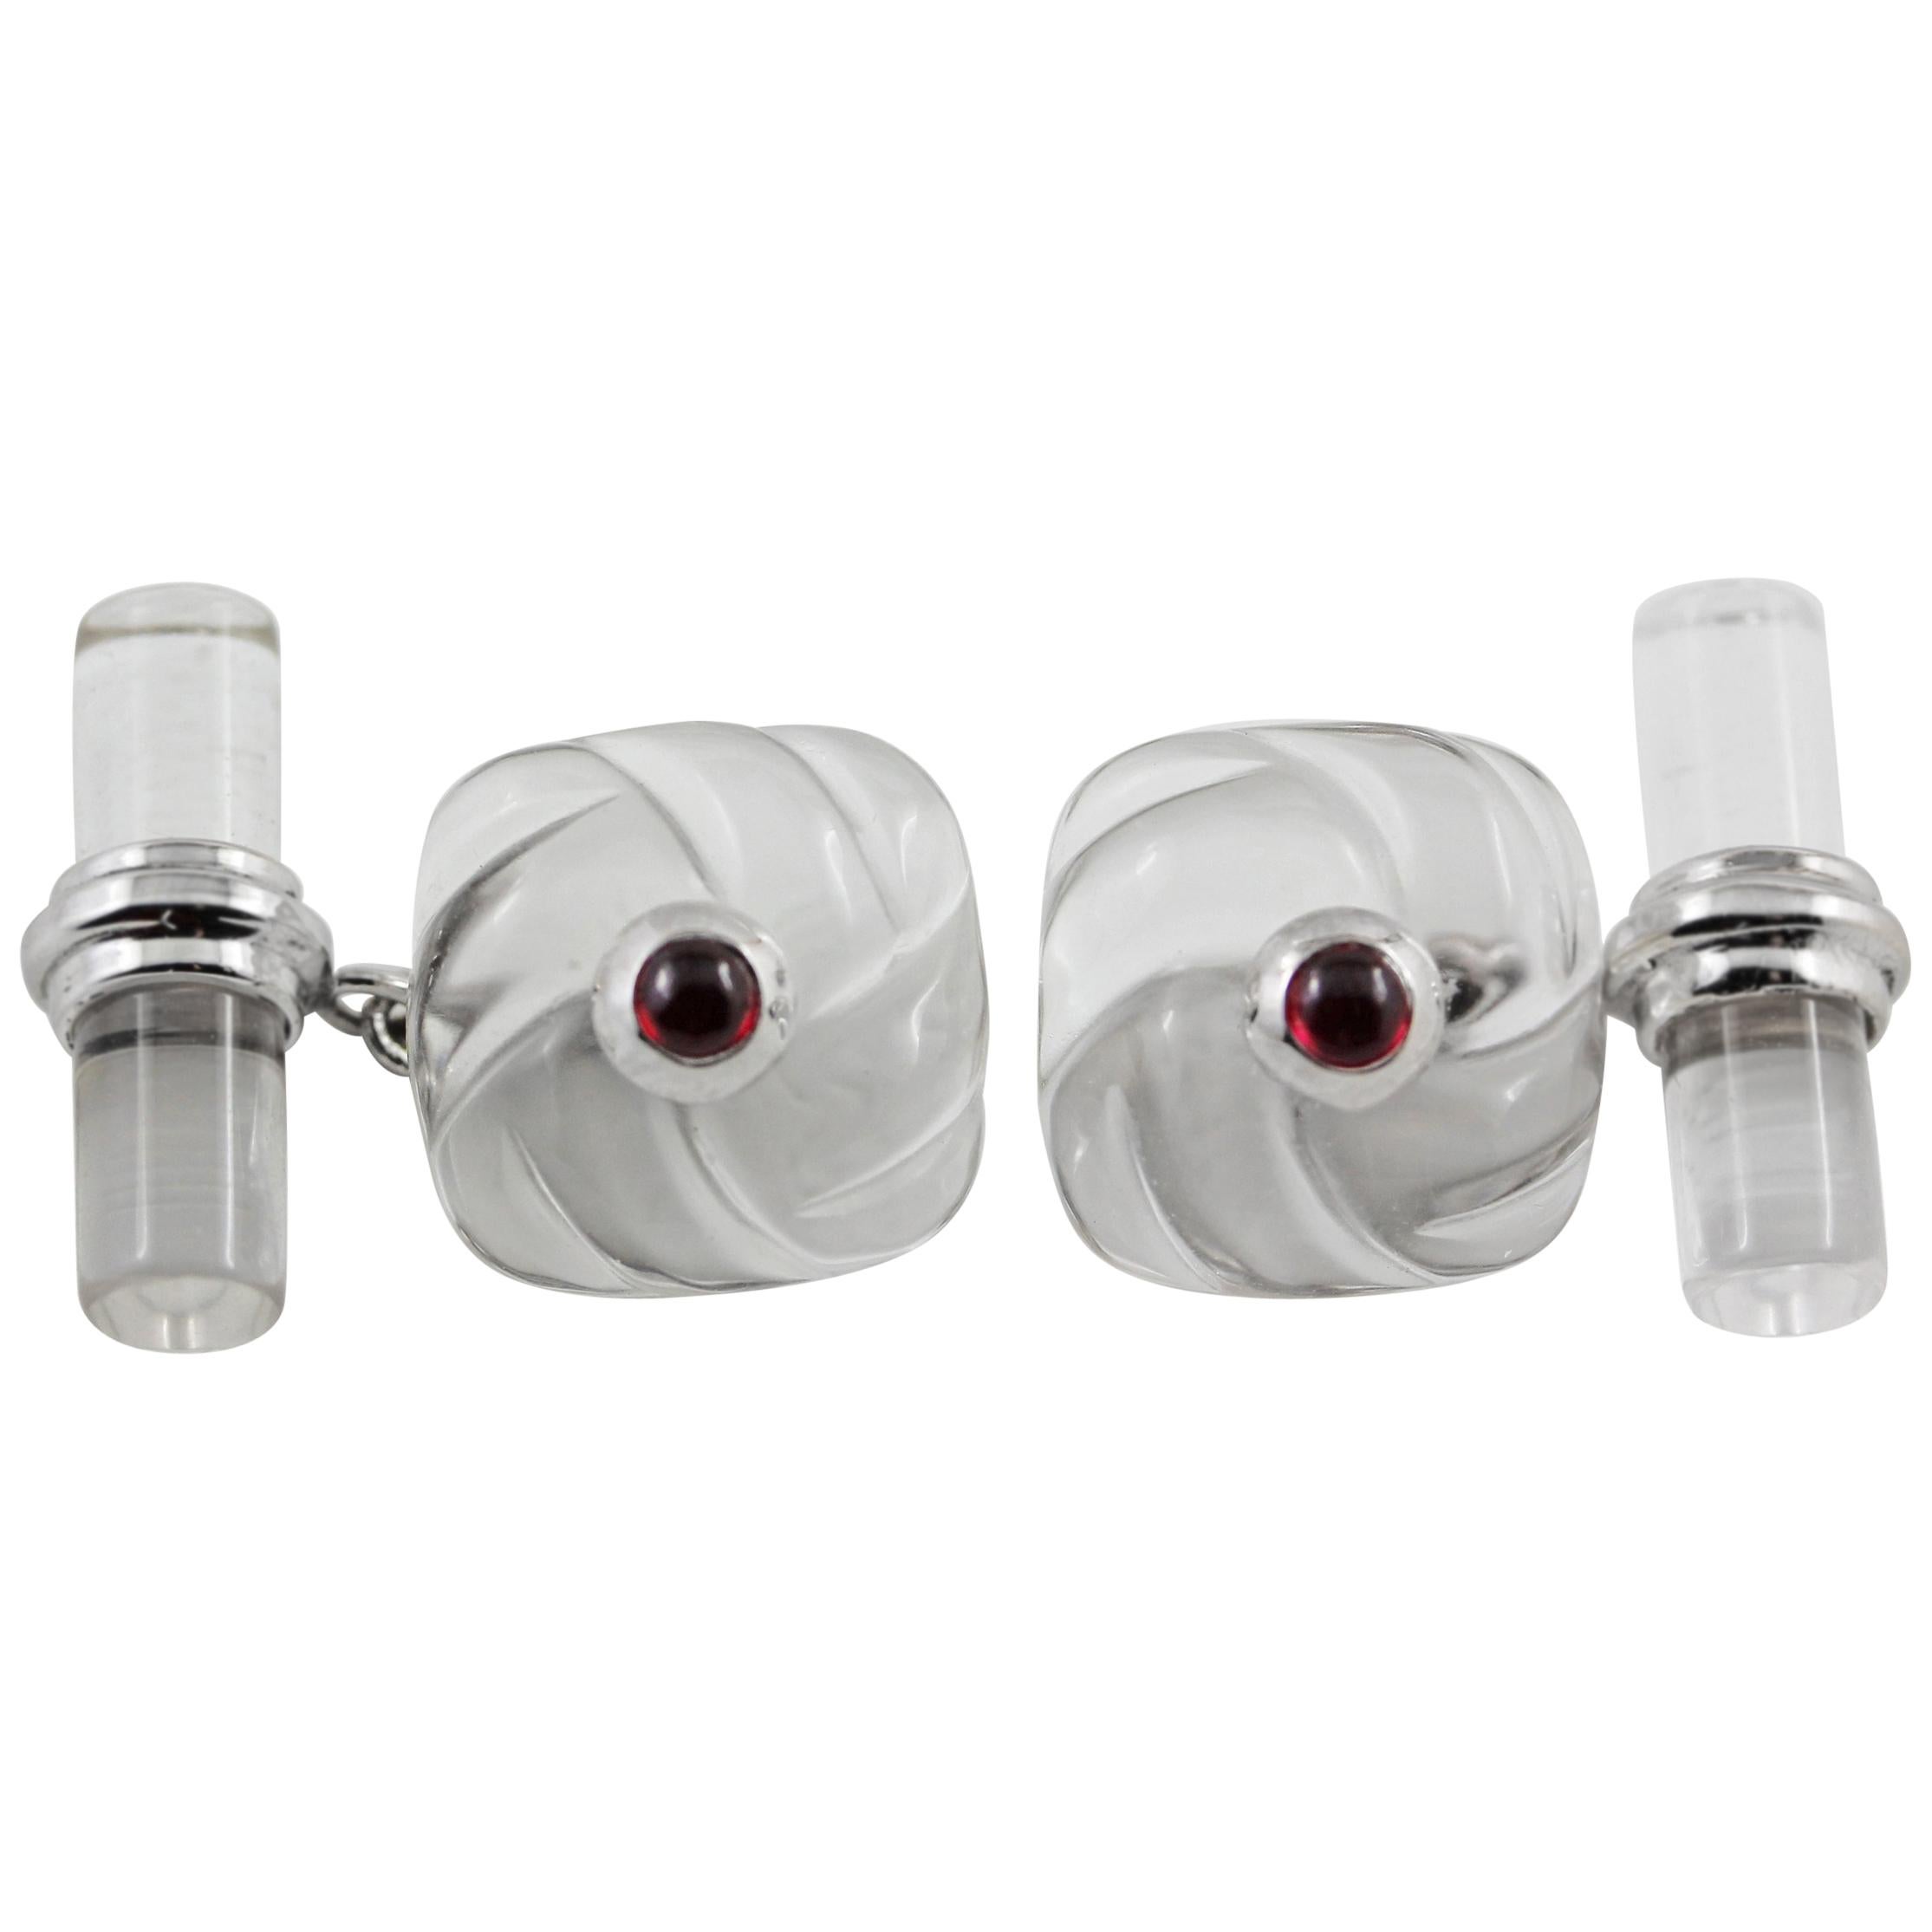 18 Karat White Gold Interwoven Square Rock Crystal and Rubies Cufflinks For Sale